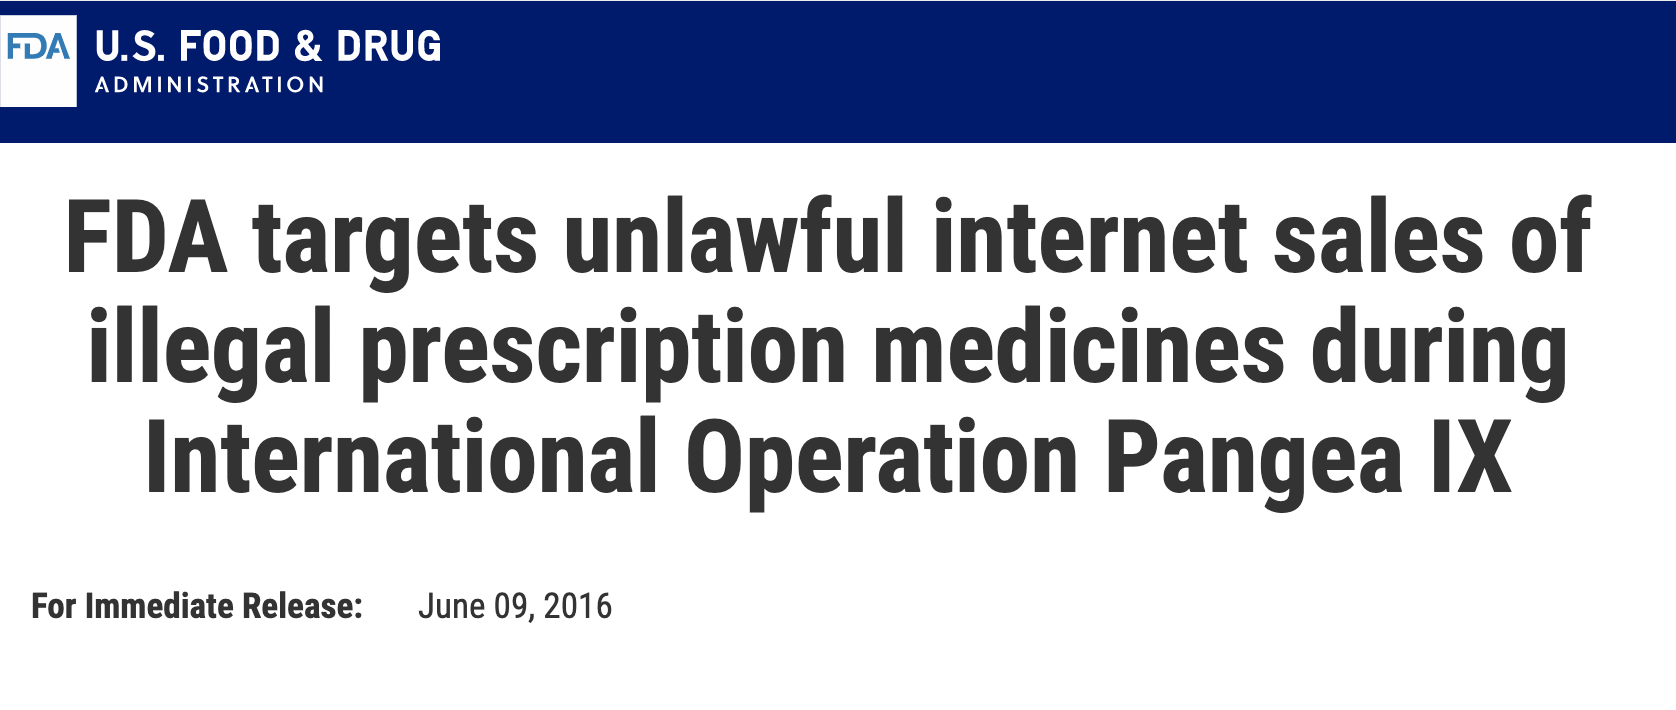 The FDA warned about DNP in its coverage of Operation Pangea in 2016.